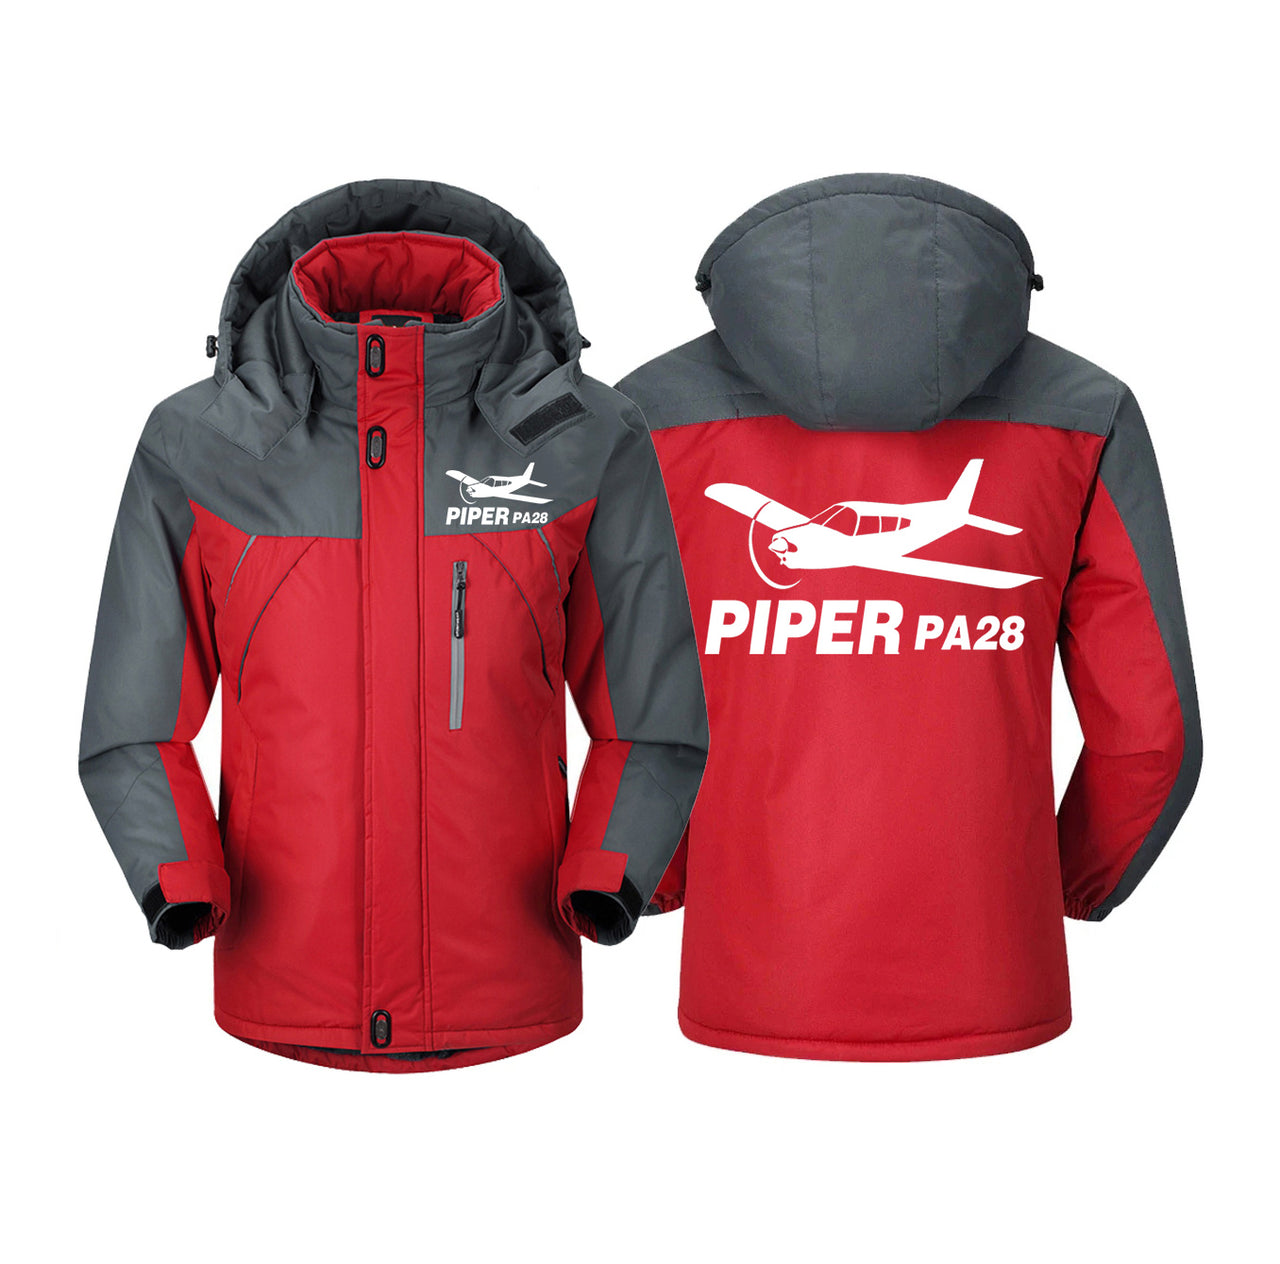 The Piper PA28 Designed Thick Winter Jackets